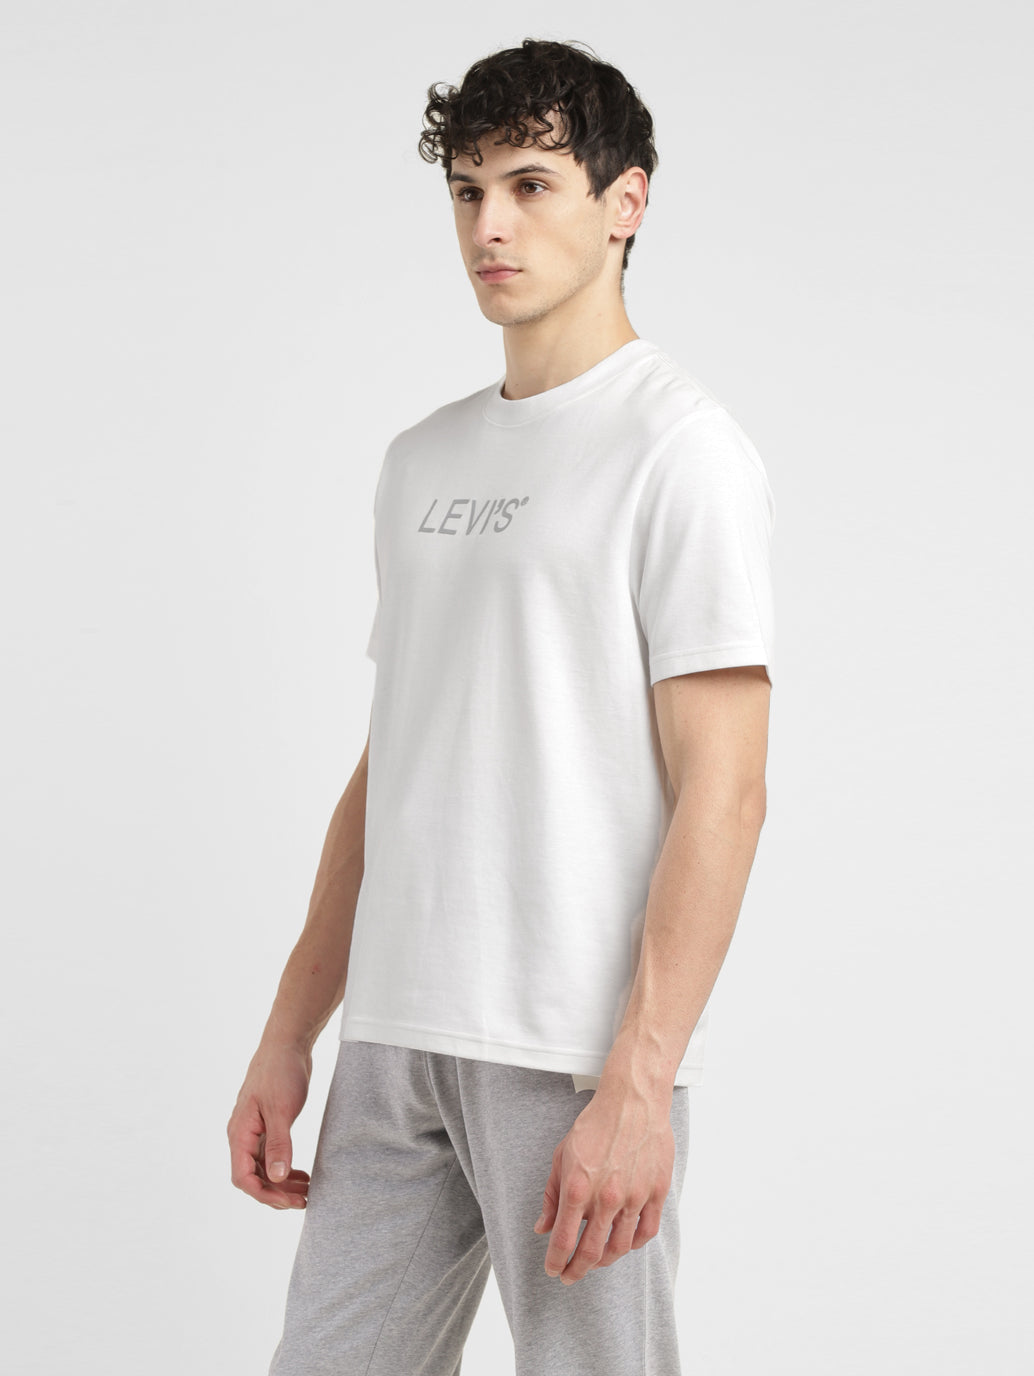 LEVIS ATHL TEE ATH BRANDED 2 BRIGHT WHITE GRA A7897-0004 T-SHIRT SHORT SLEEVE (M)